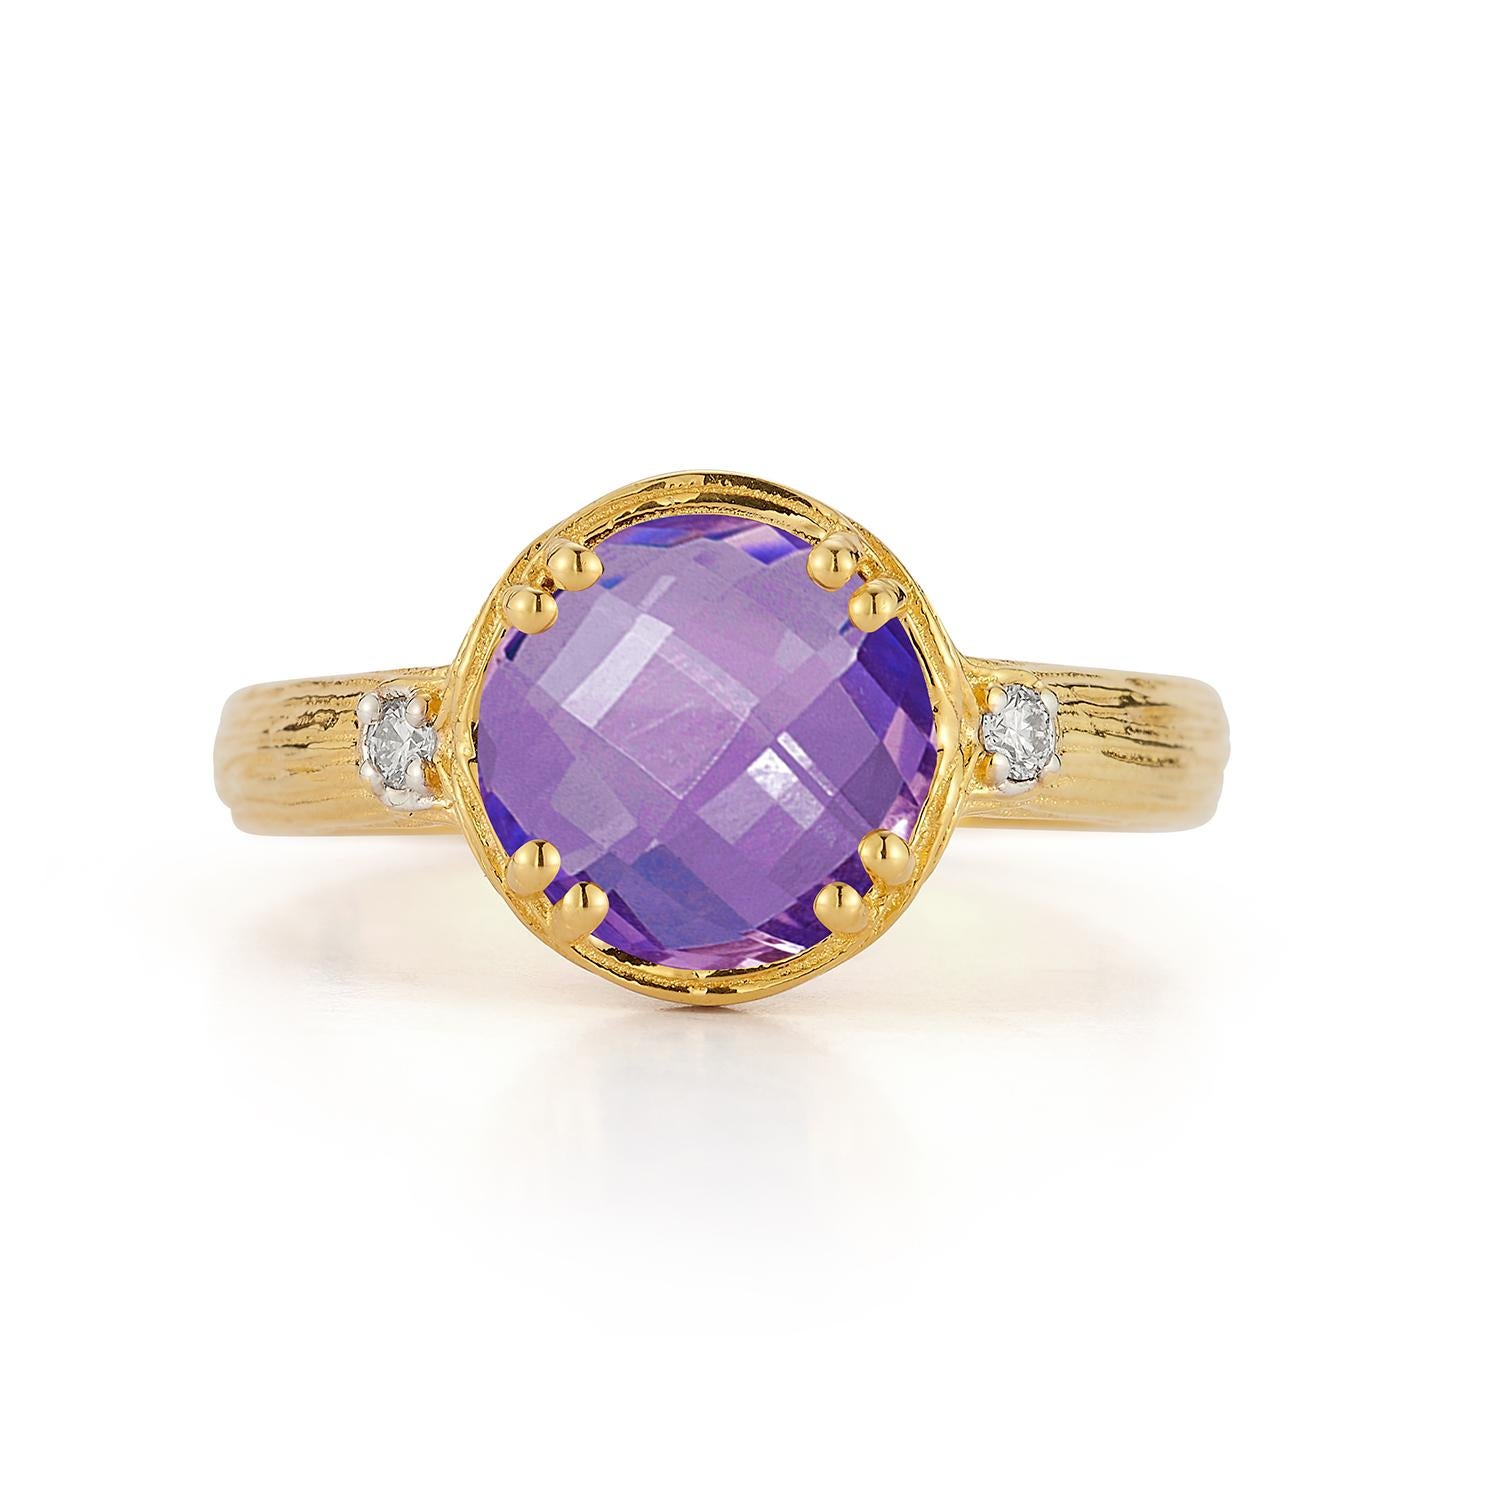 For Sale:  Hand-Crafted 14K Gold 0.05 ct. tw. Diamond & 1.75CT Amethyst Cocktail Ring 3